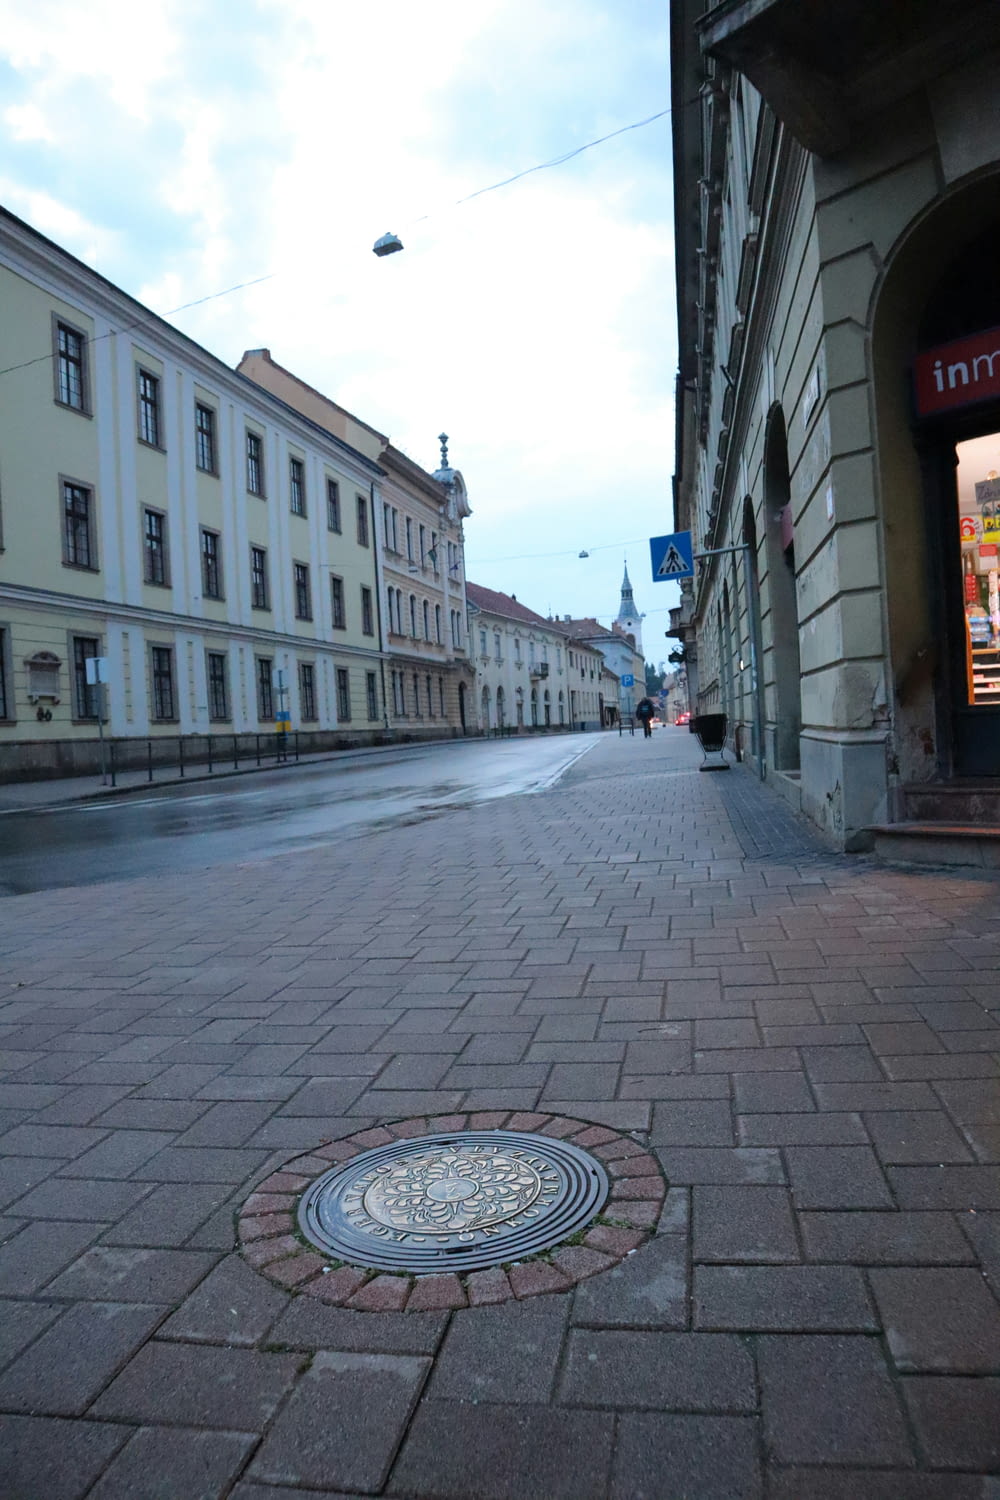 a manhole cover on a brick street with buildings in the background